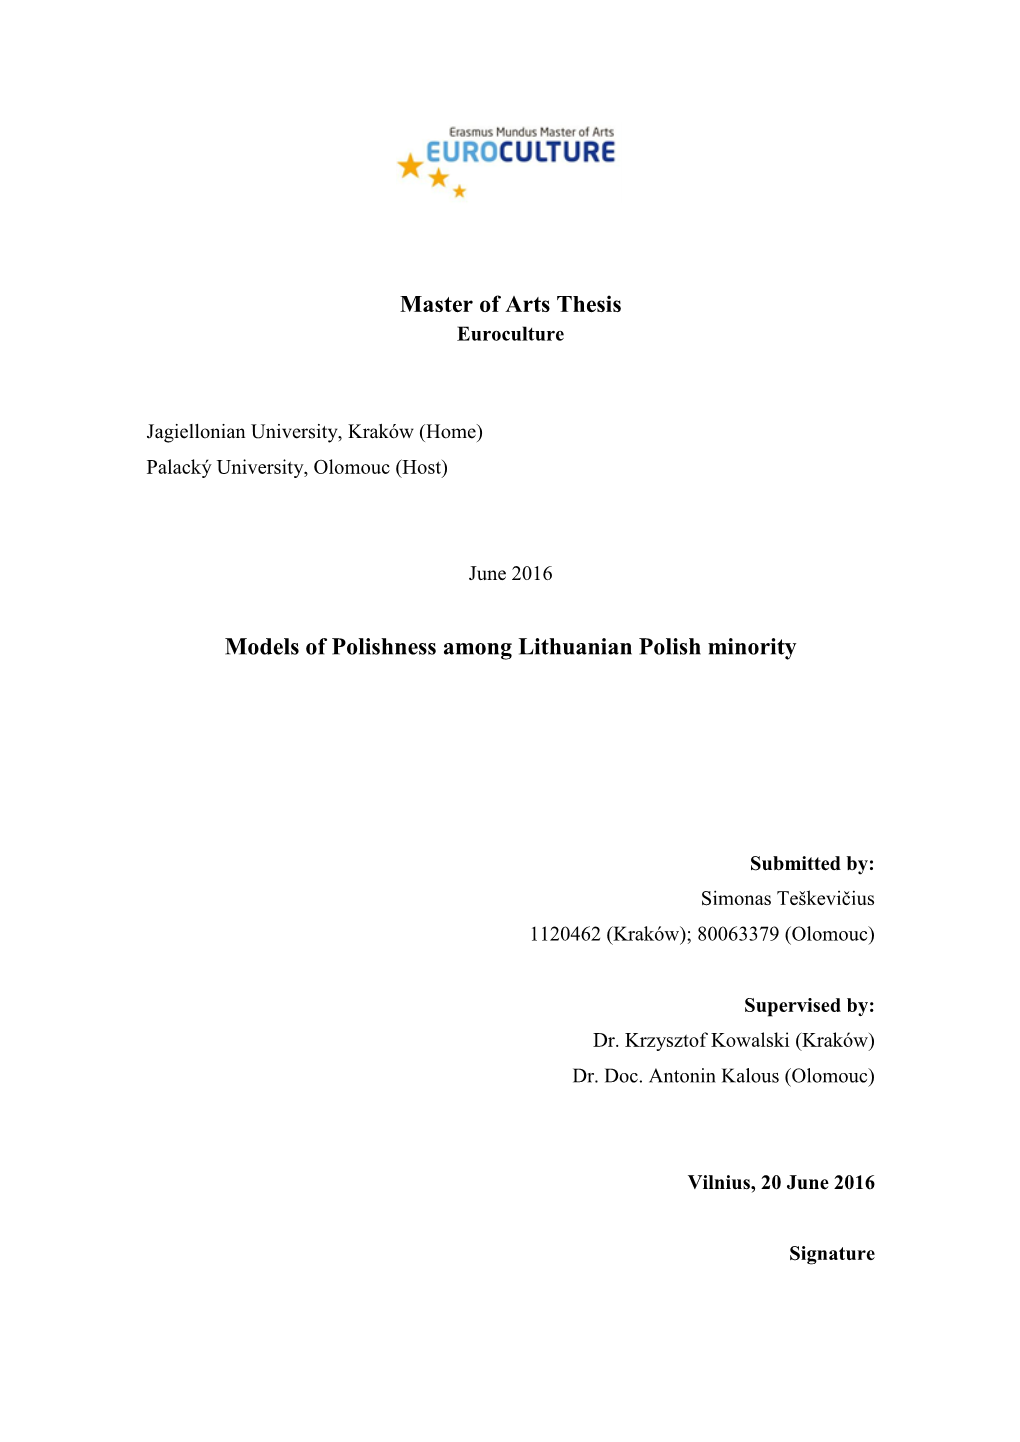 Master of Arts Thesis Models of Polishness Among Lithuanian